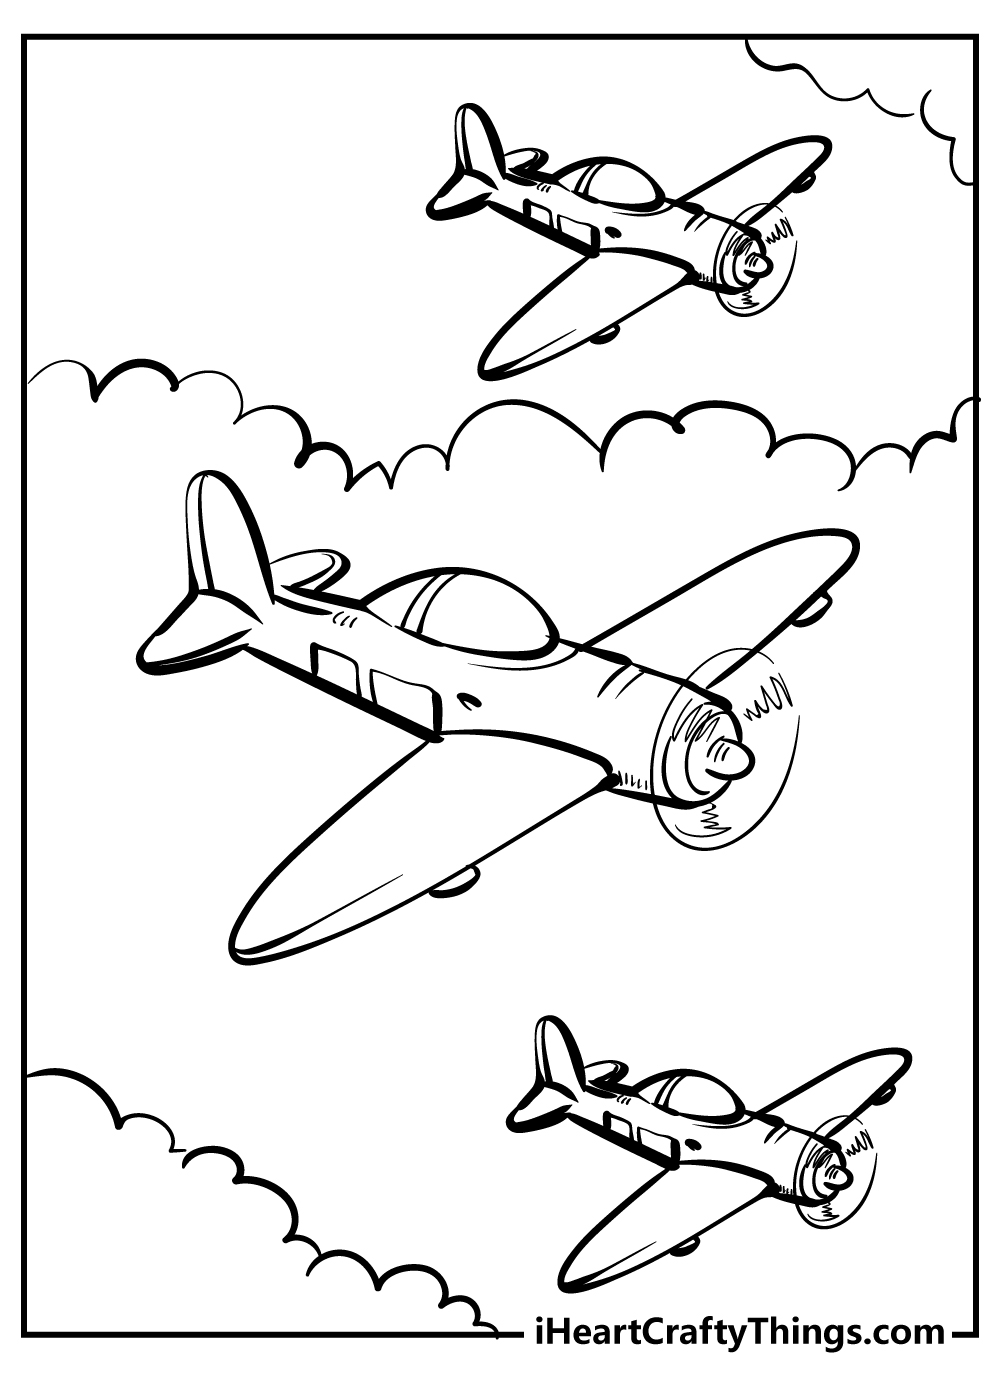 Airplane coloring pages free printable